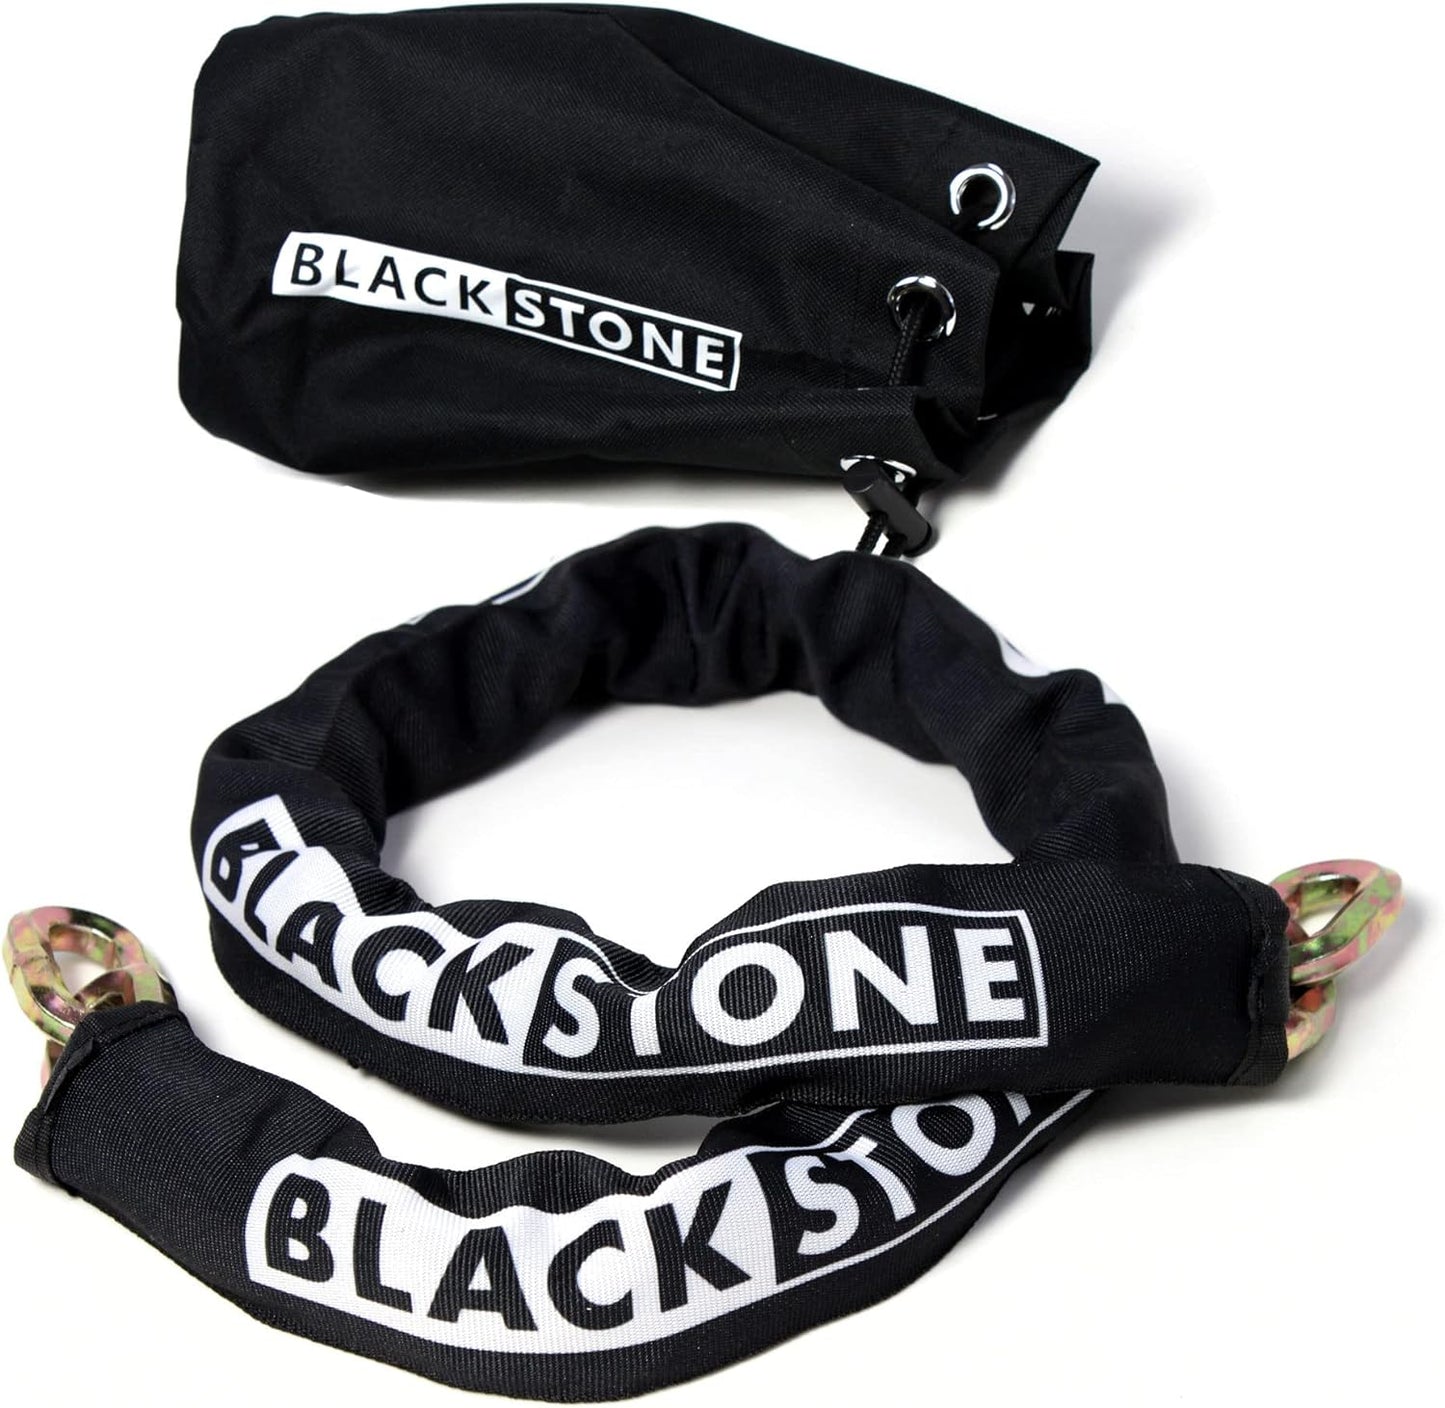 A coiled high-security Black Stone chain lock covered with a black sleeve featuring the brand's white logo, accompanied by a matching black storage pouch, on a white background